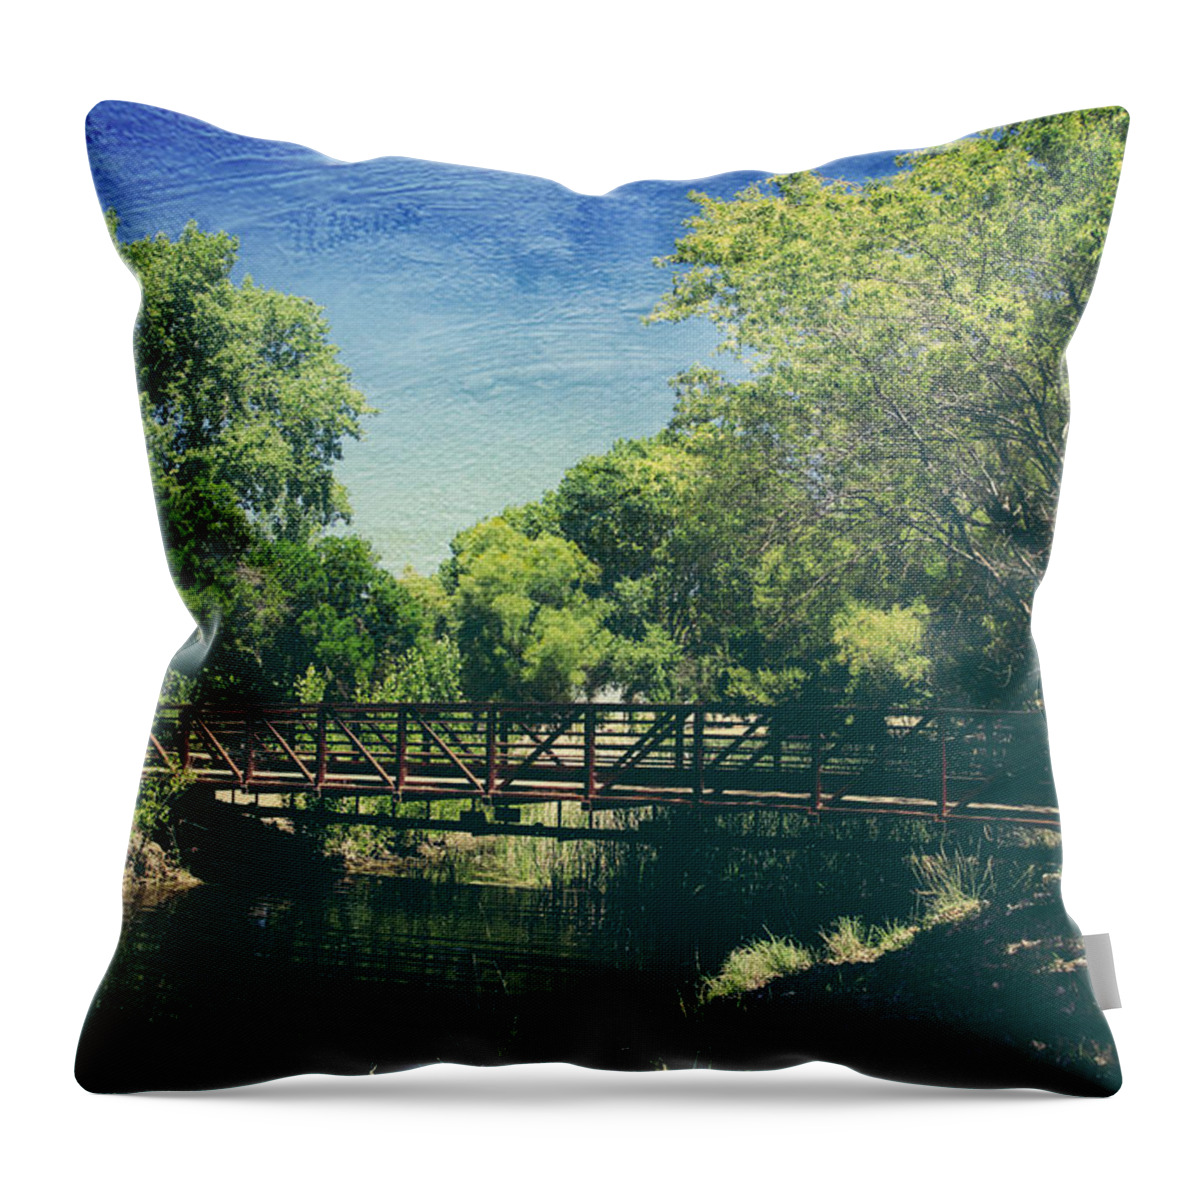 Contra Loma Regional Park Throw Pillow featuring the photograph Summer Draws Near by Laurie Search